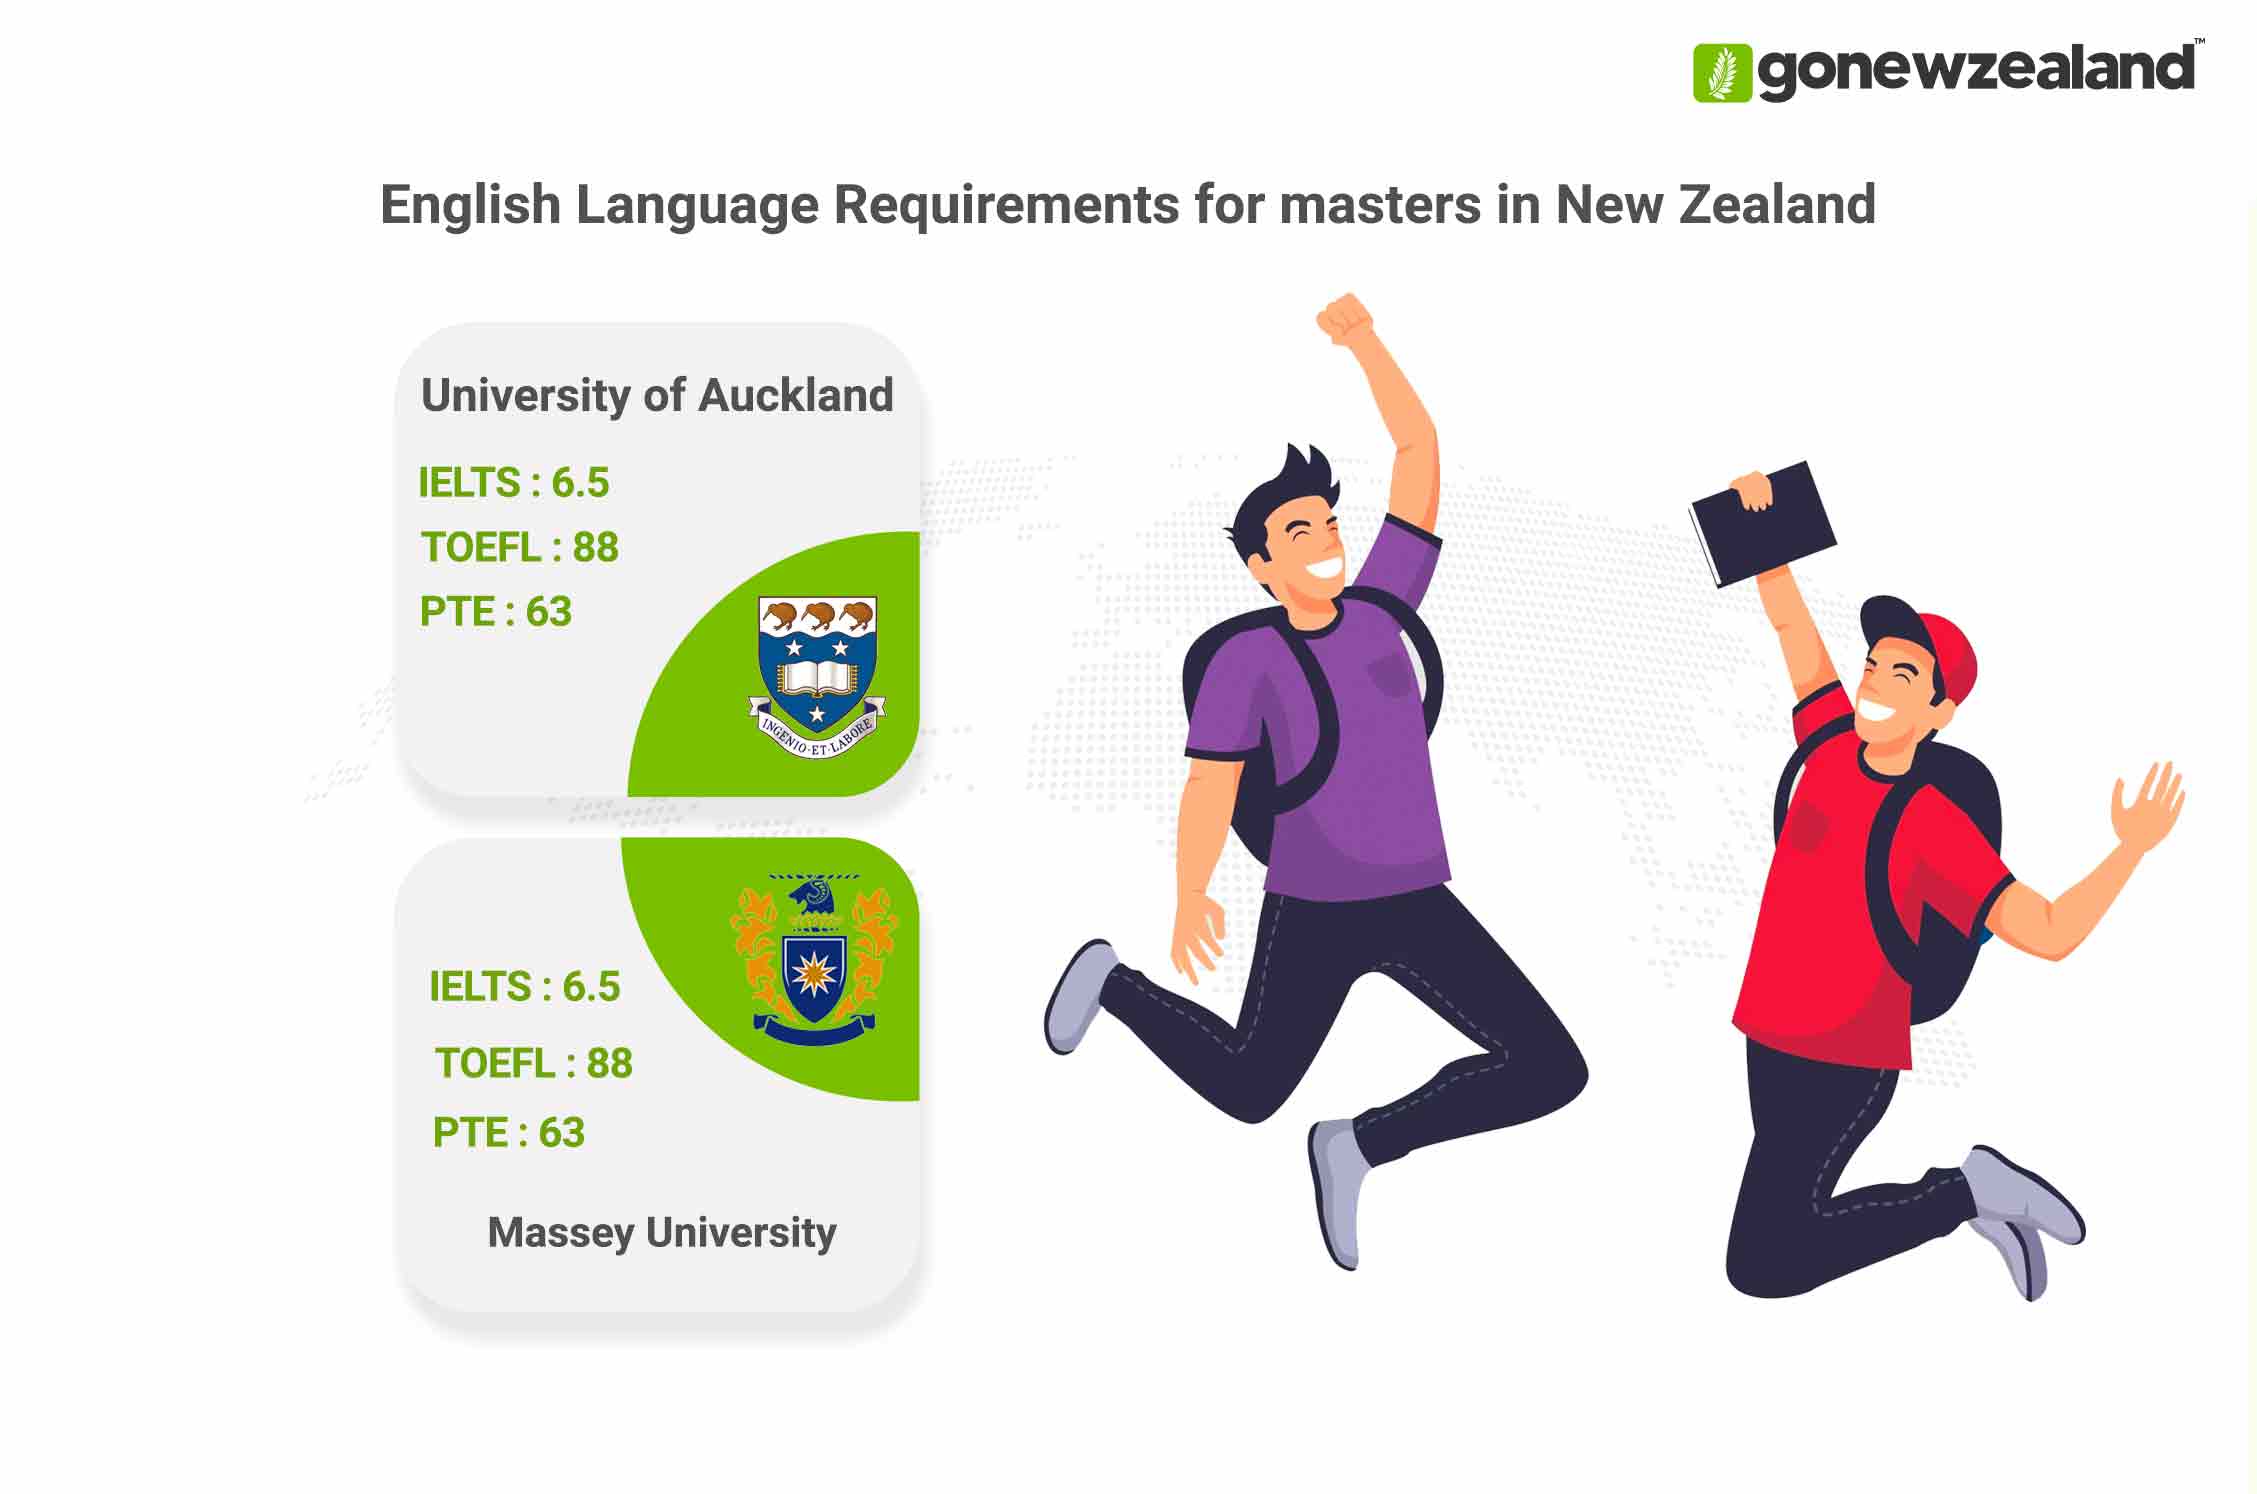 Masters in New Zealand English Language Requirements